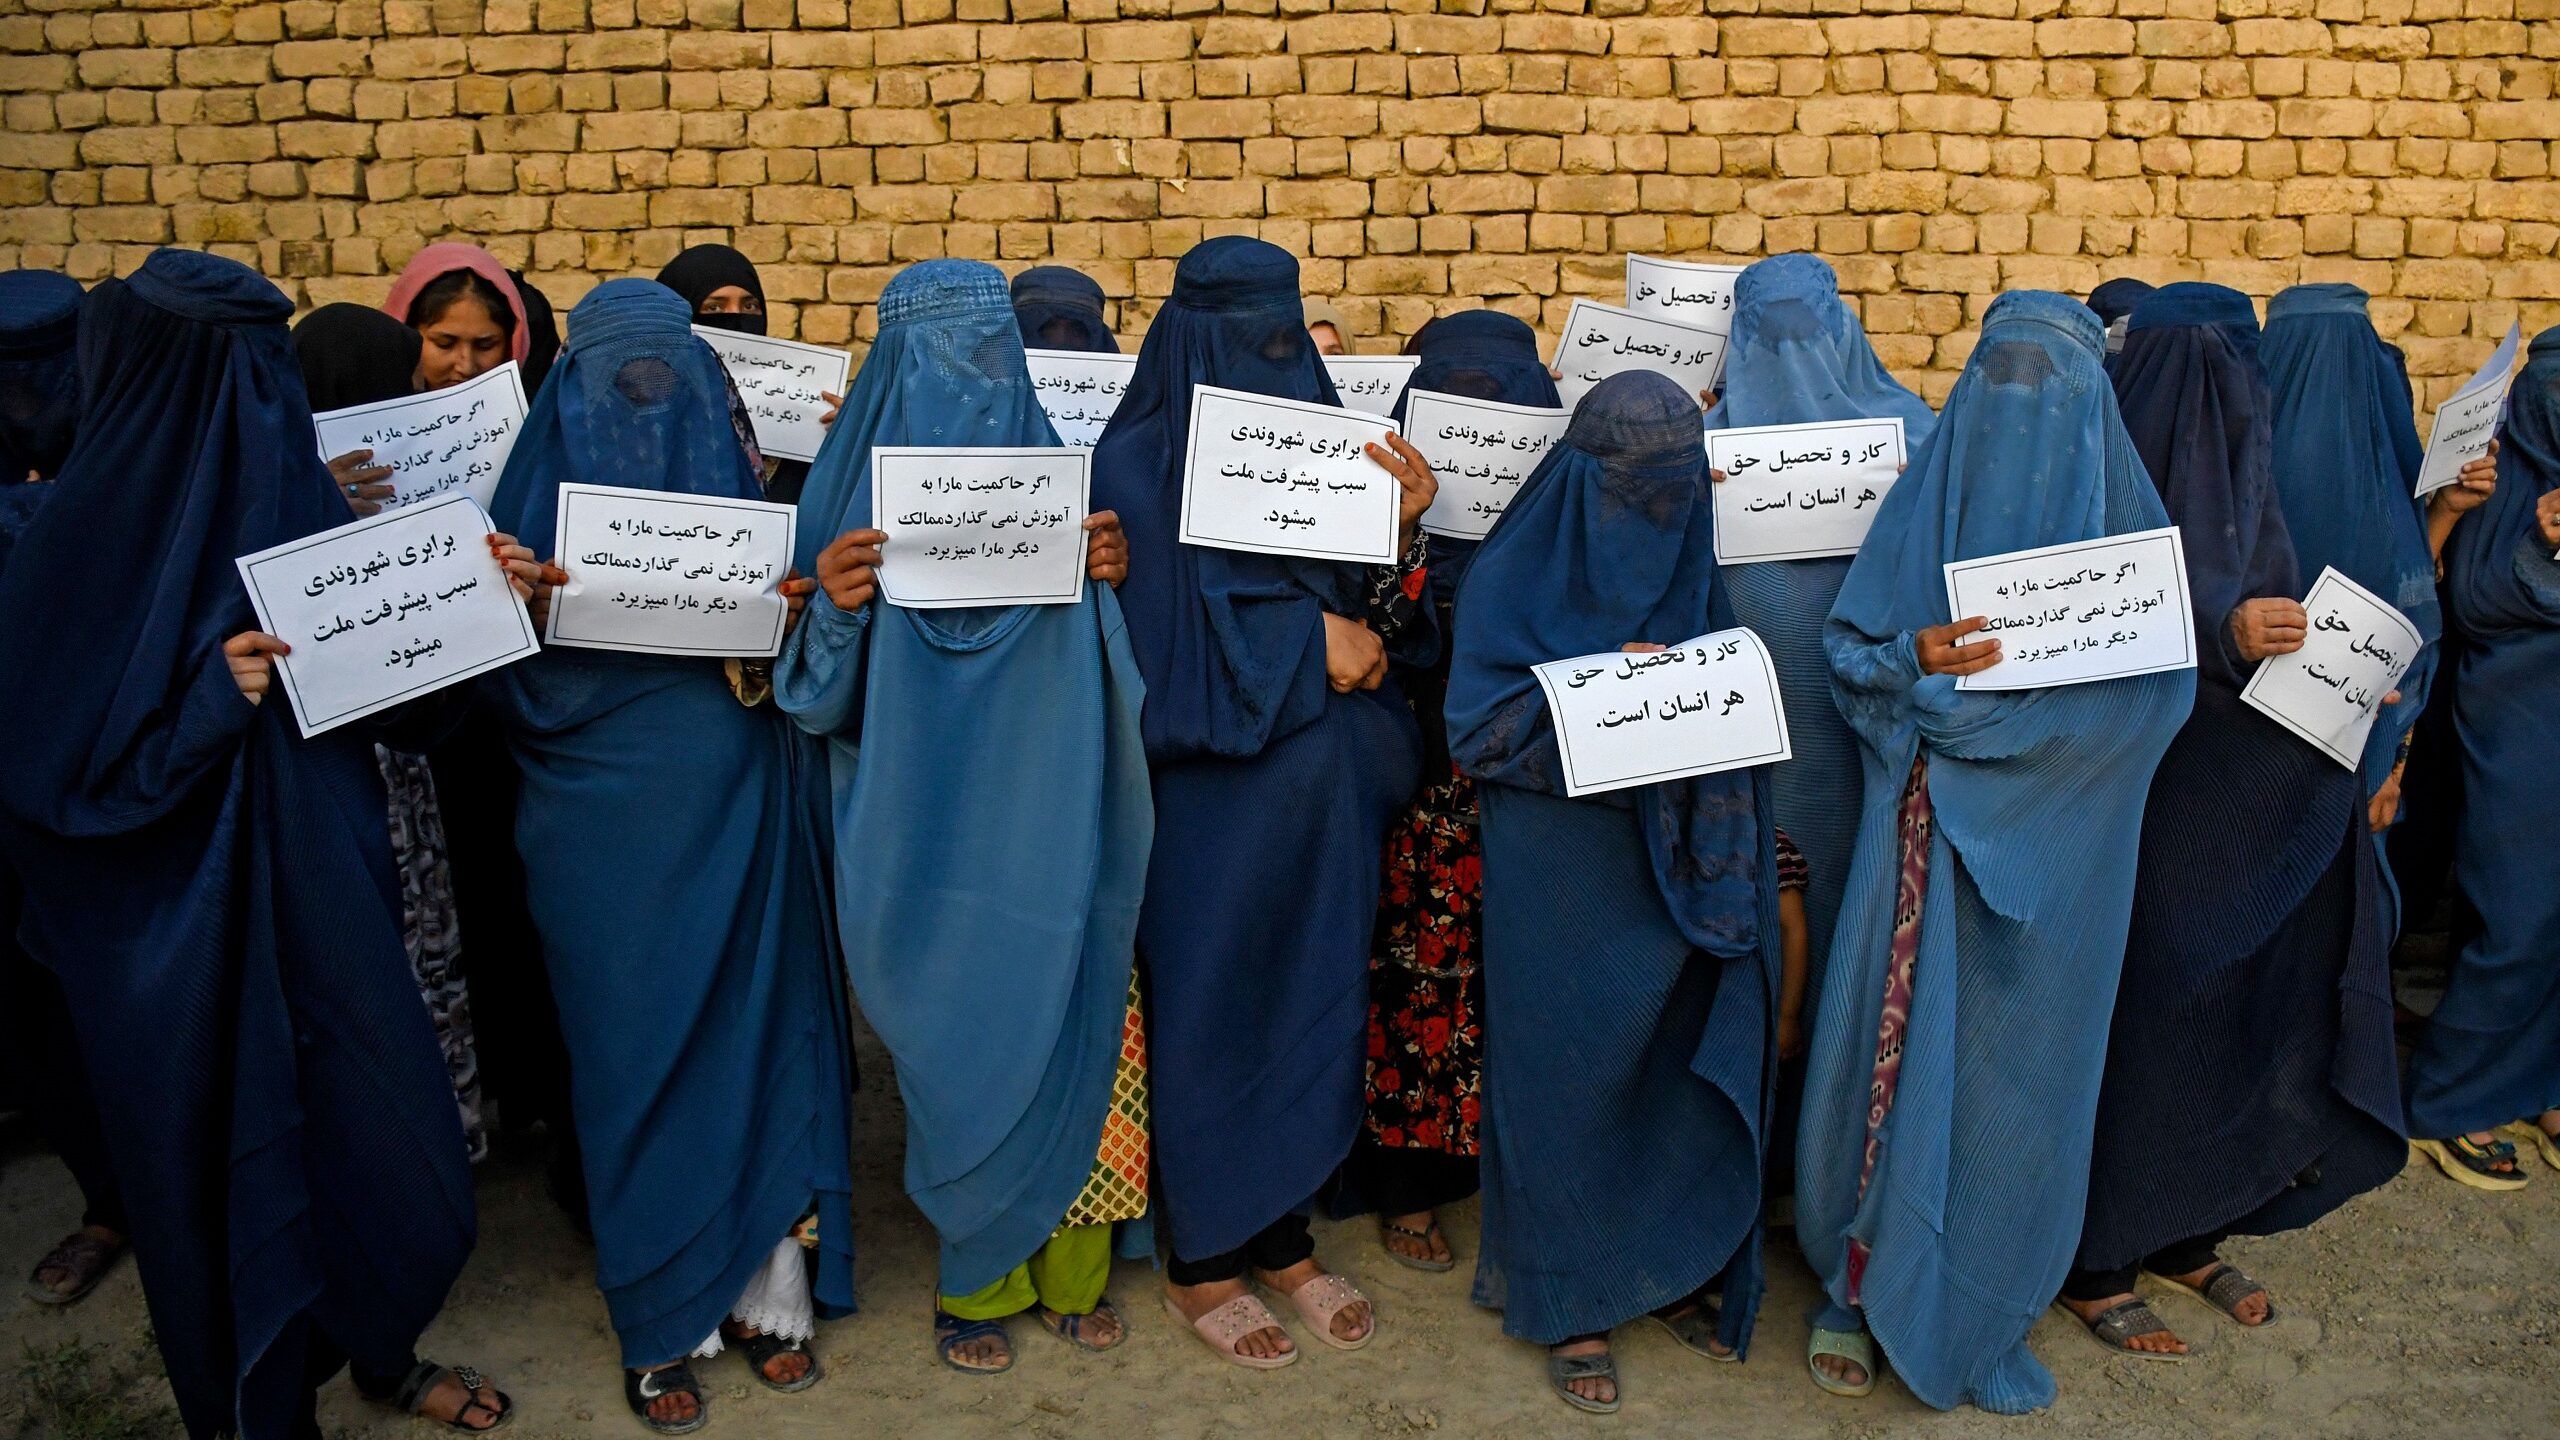 Afghan Women Struggle for Rights Under Increasing Taliban Repression